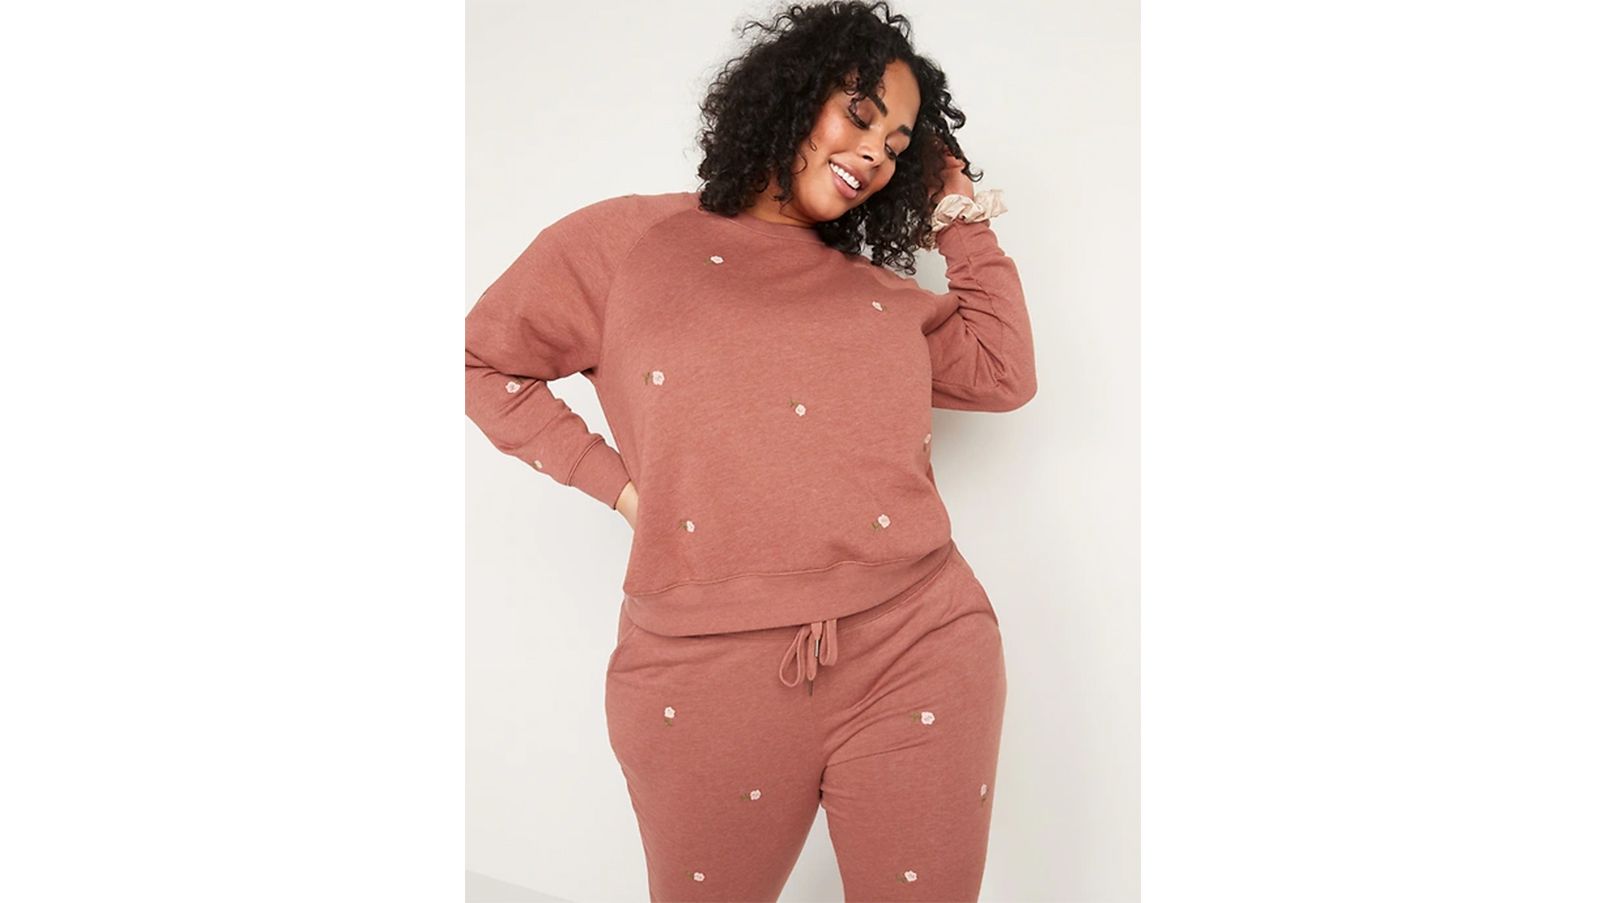 Young Woman in a Matching Sweatsuit Set · Free Stock Photo